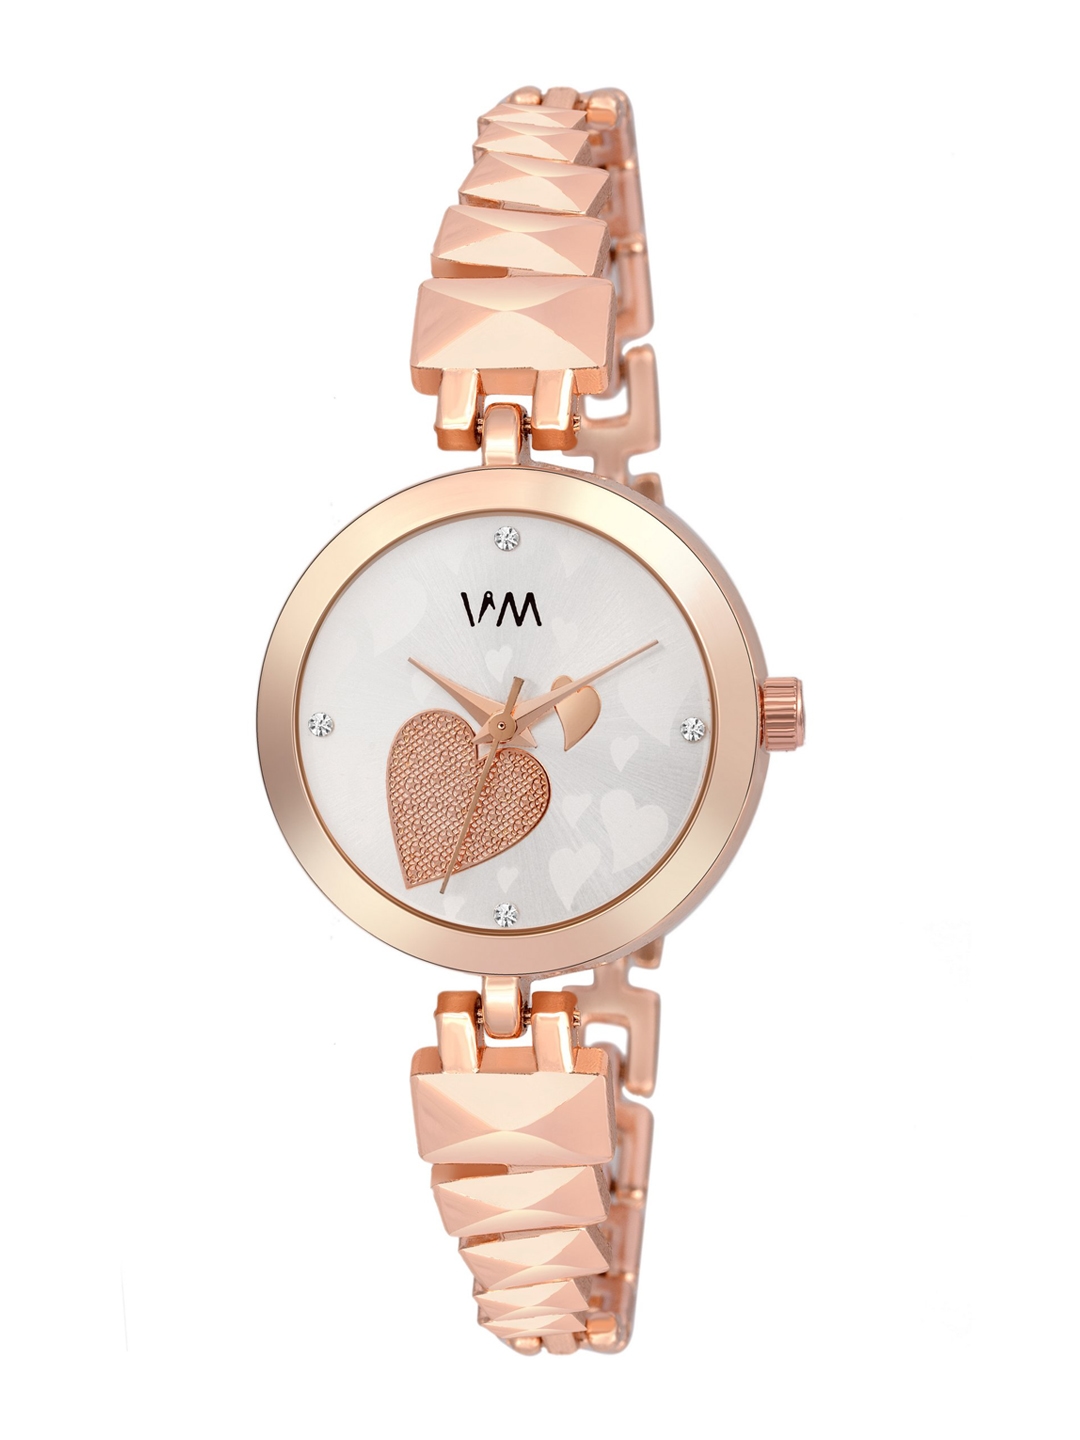 Watch Me Women White Printed Dial   Rose Gold Toned Analogue Watches   PP 017